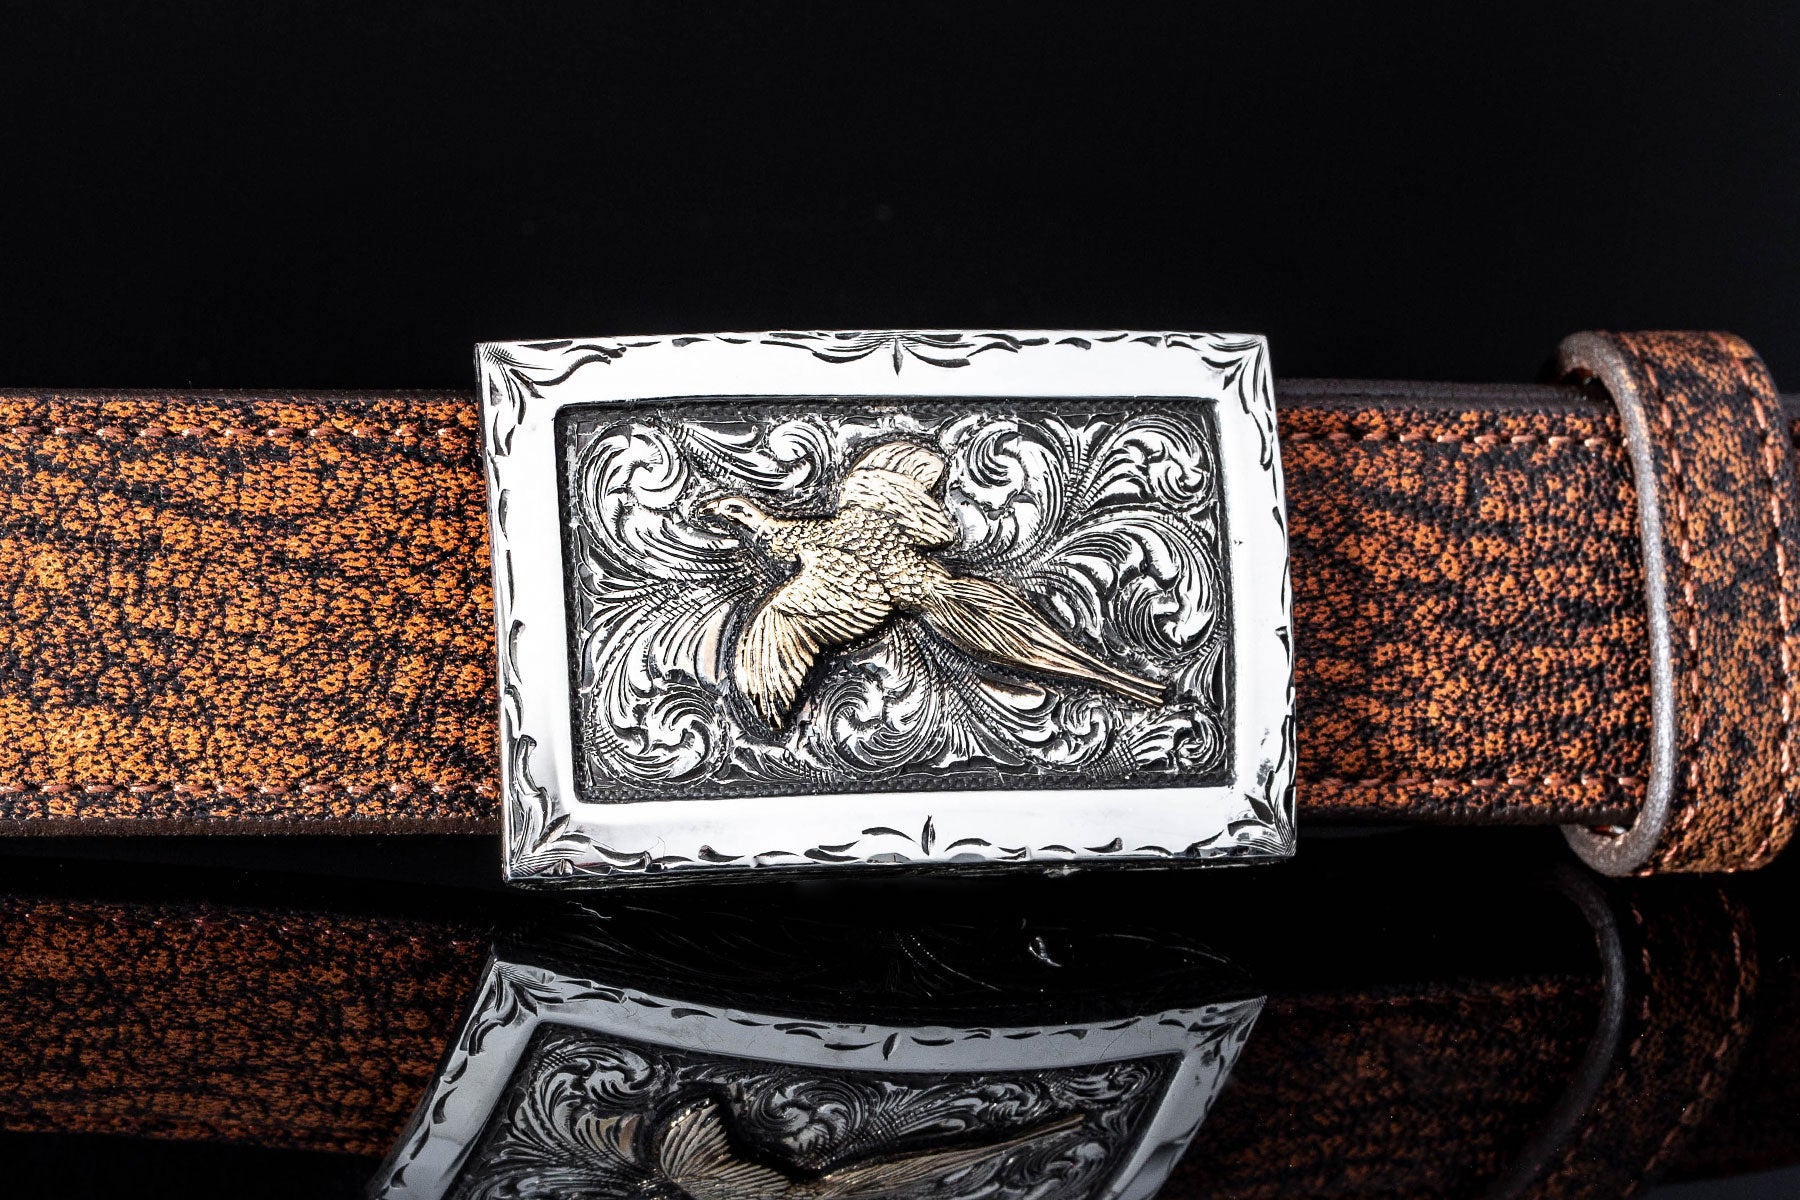 Tyson B E Pheasant | Belts And Buckles - Trophy | Comstock Heritage